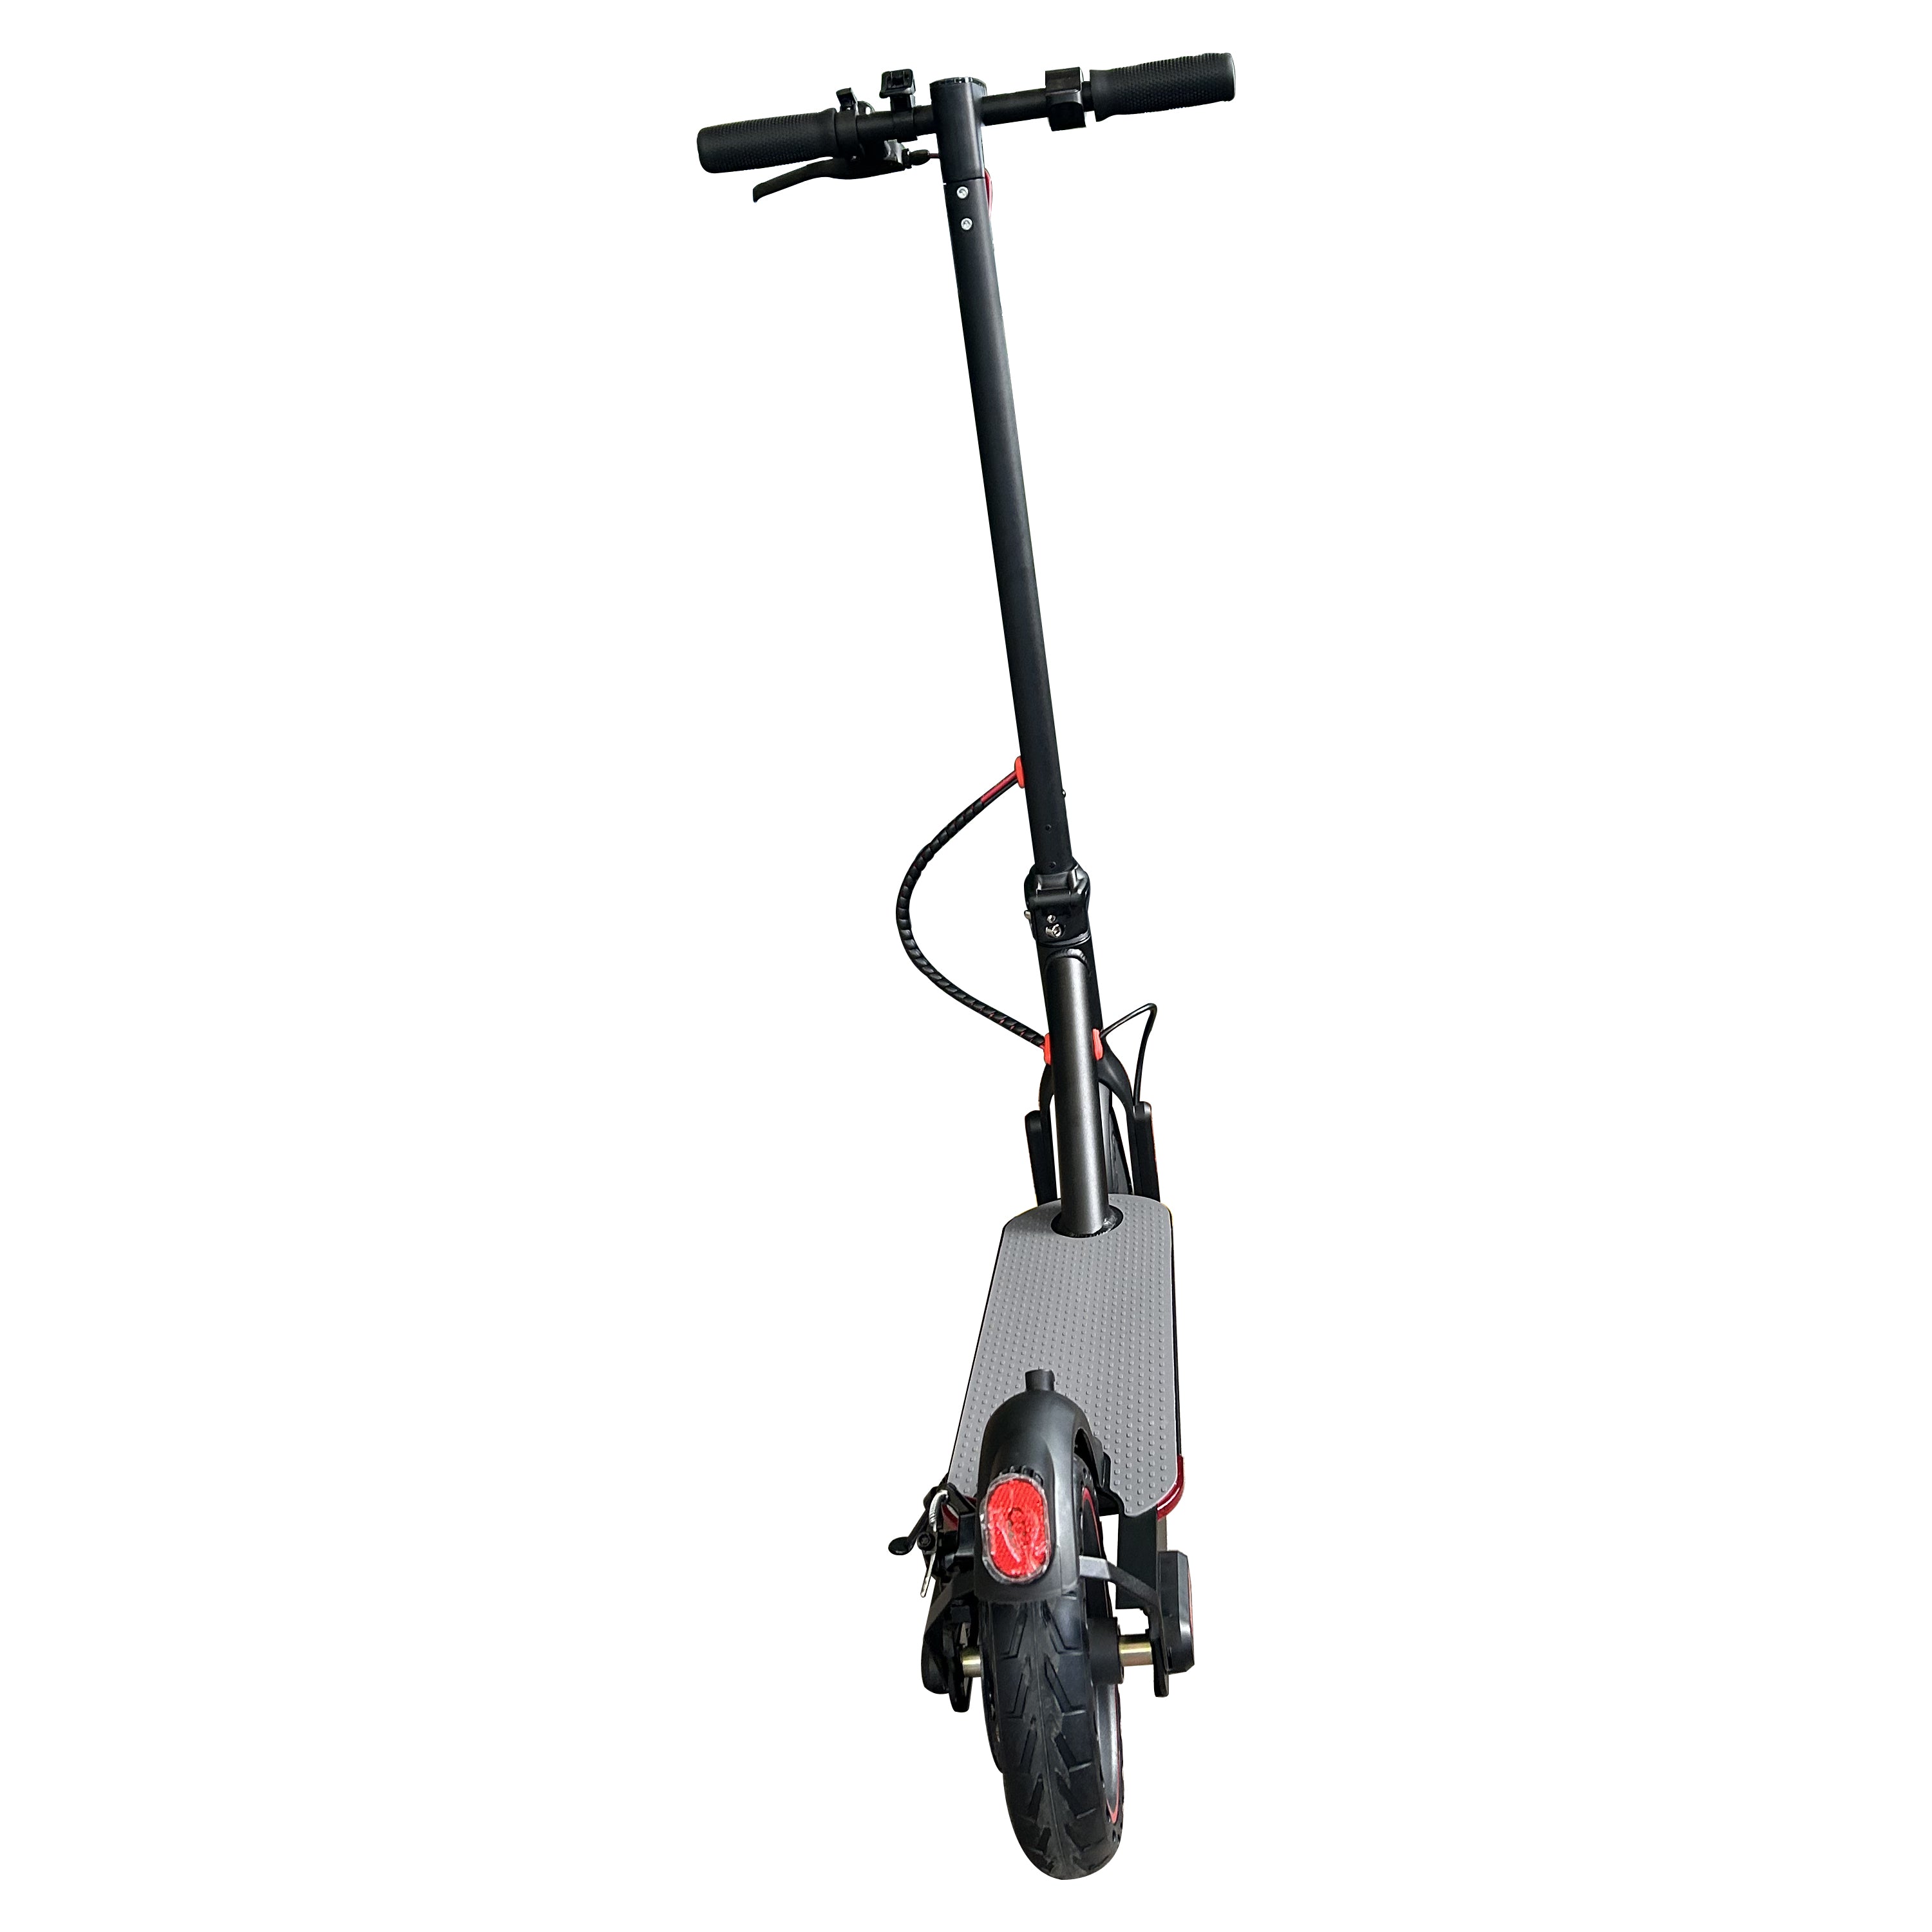 E9PRO Electric Scooter Adults with cruise control Dual Brake System 350W Motor with 8.5'' Solid Tires , Up to 30km/h & range 30km foldable E-Scooter.